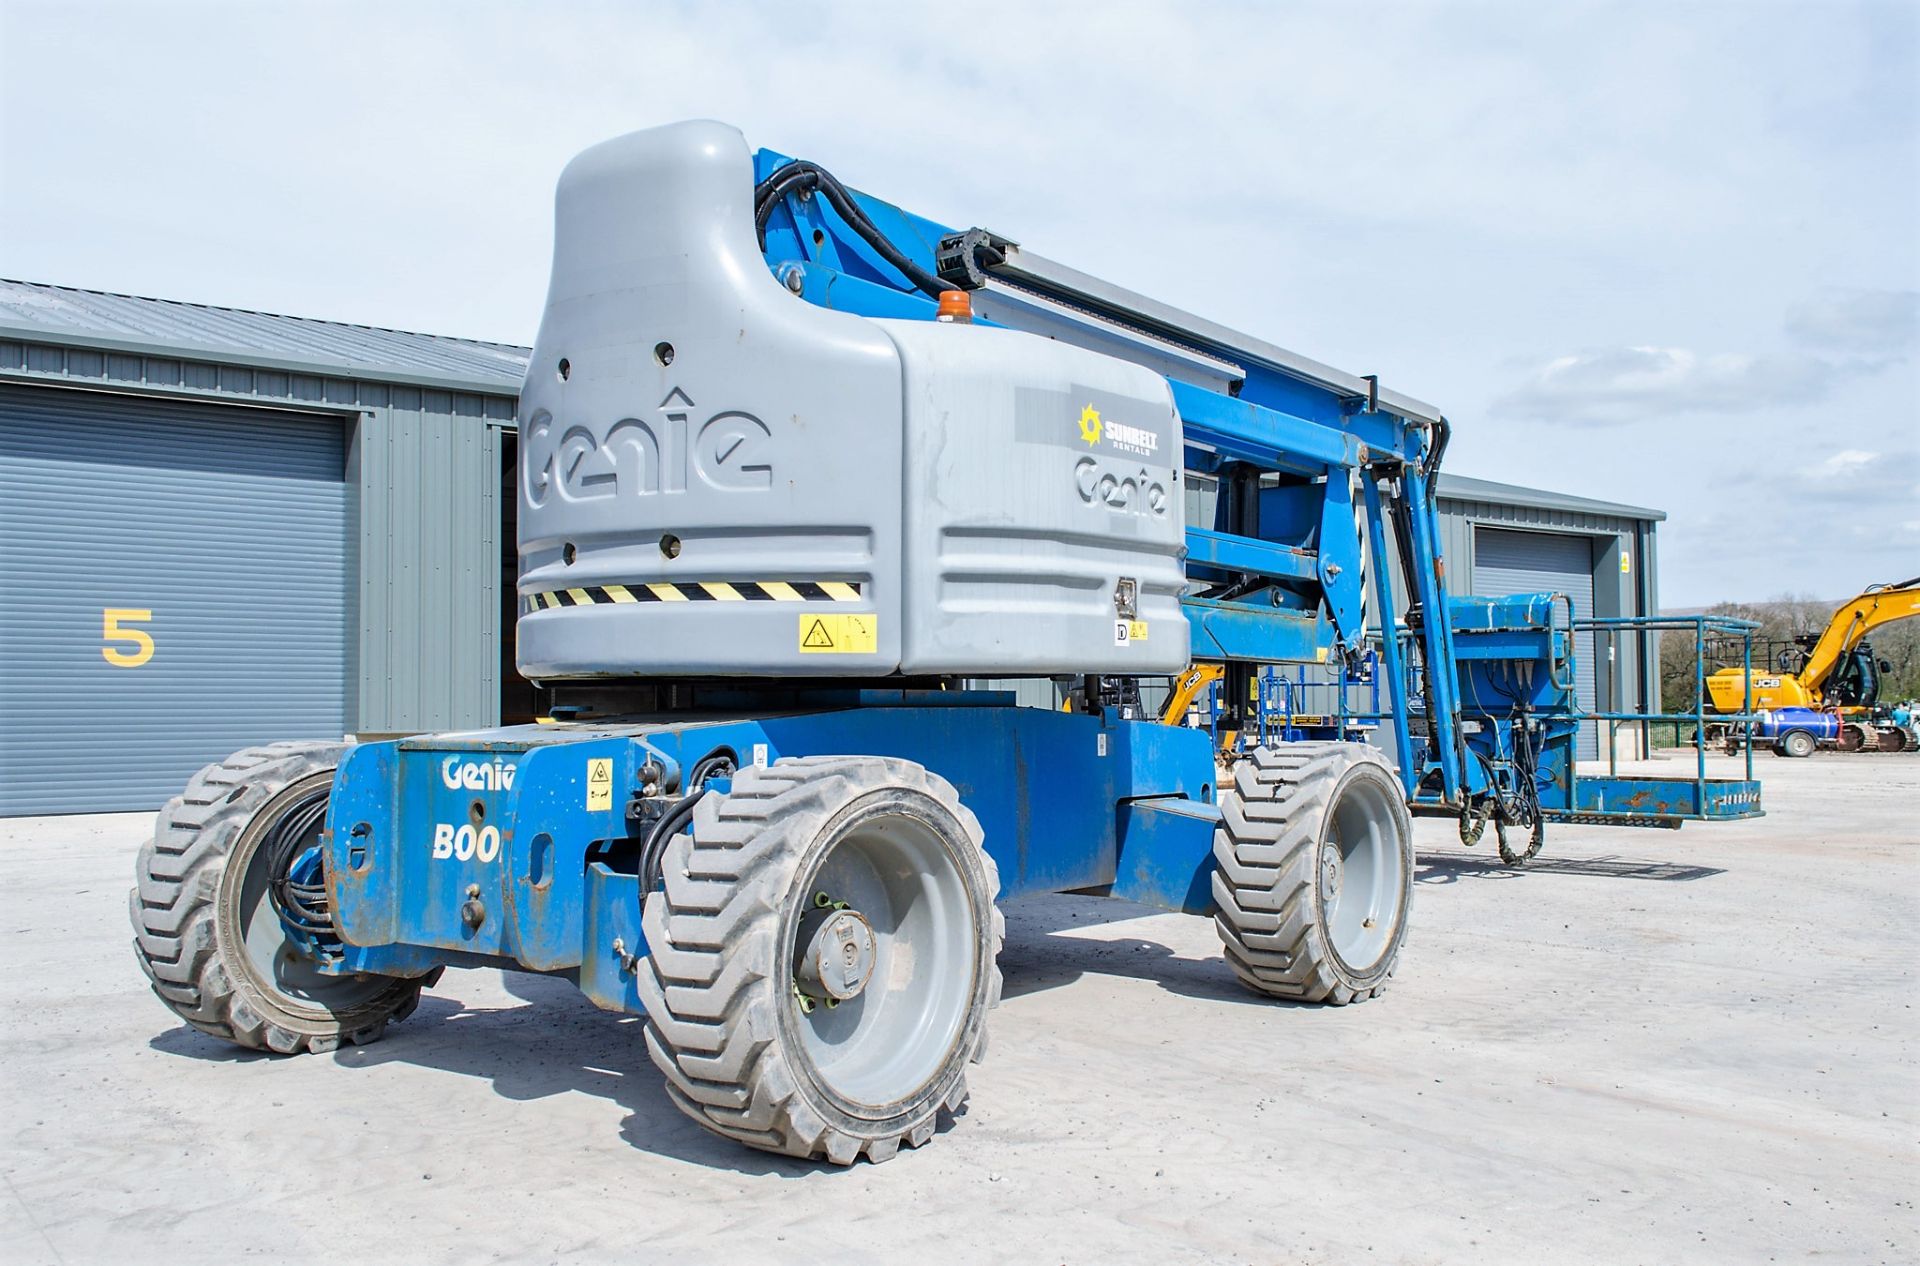 Genie Z60/34 diesel driven articulated boom access platform Year: 2014 S/N: 13399 Recorded Hours: - Image 4 of 16